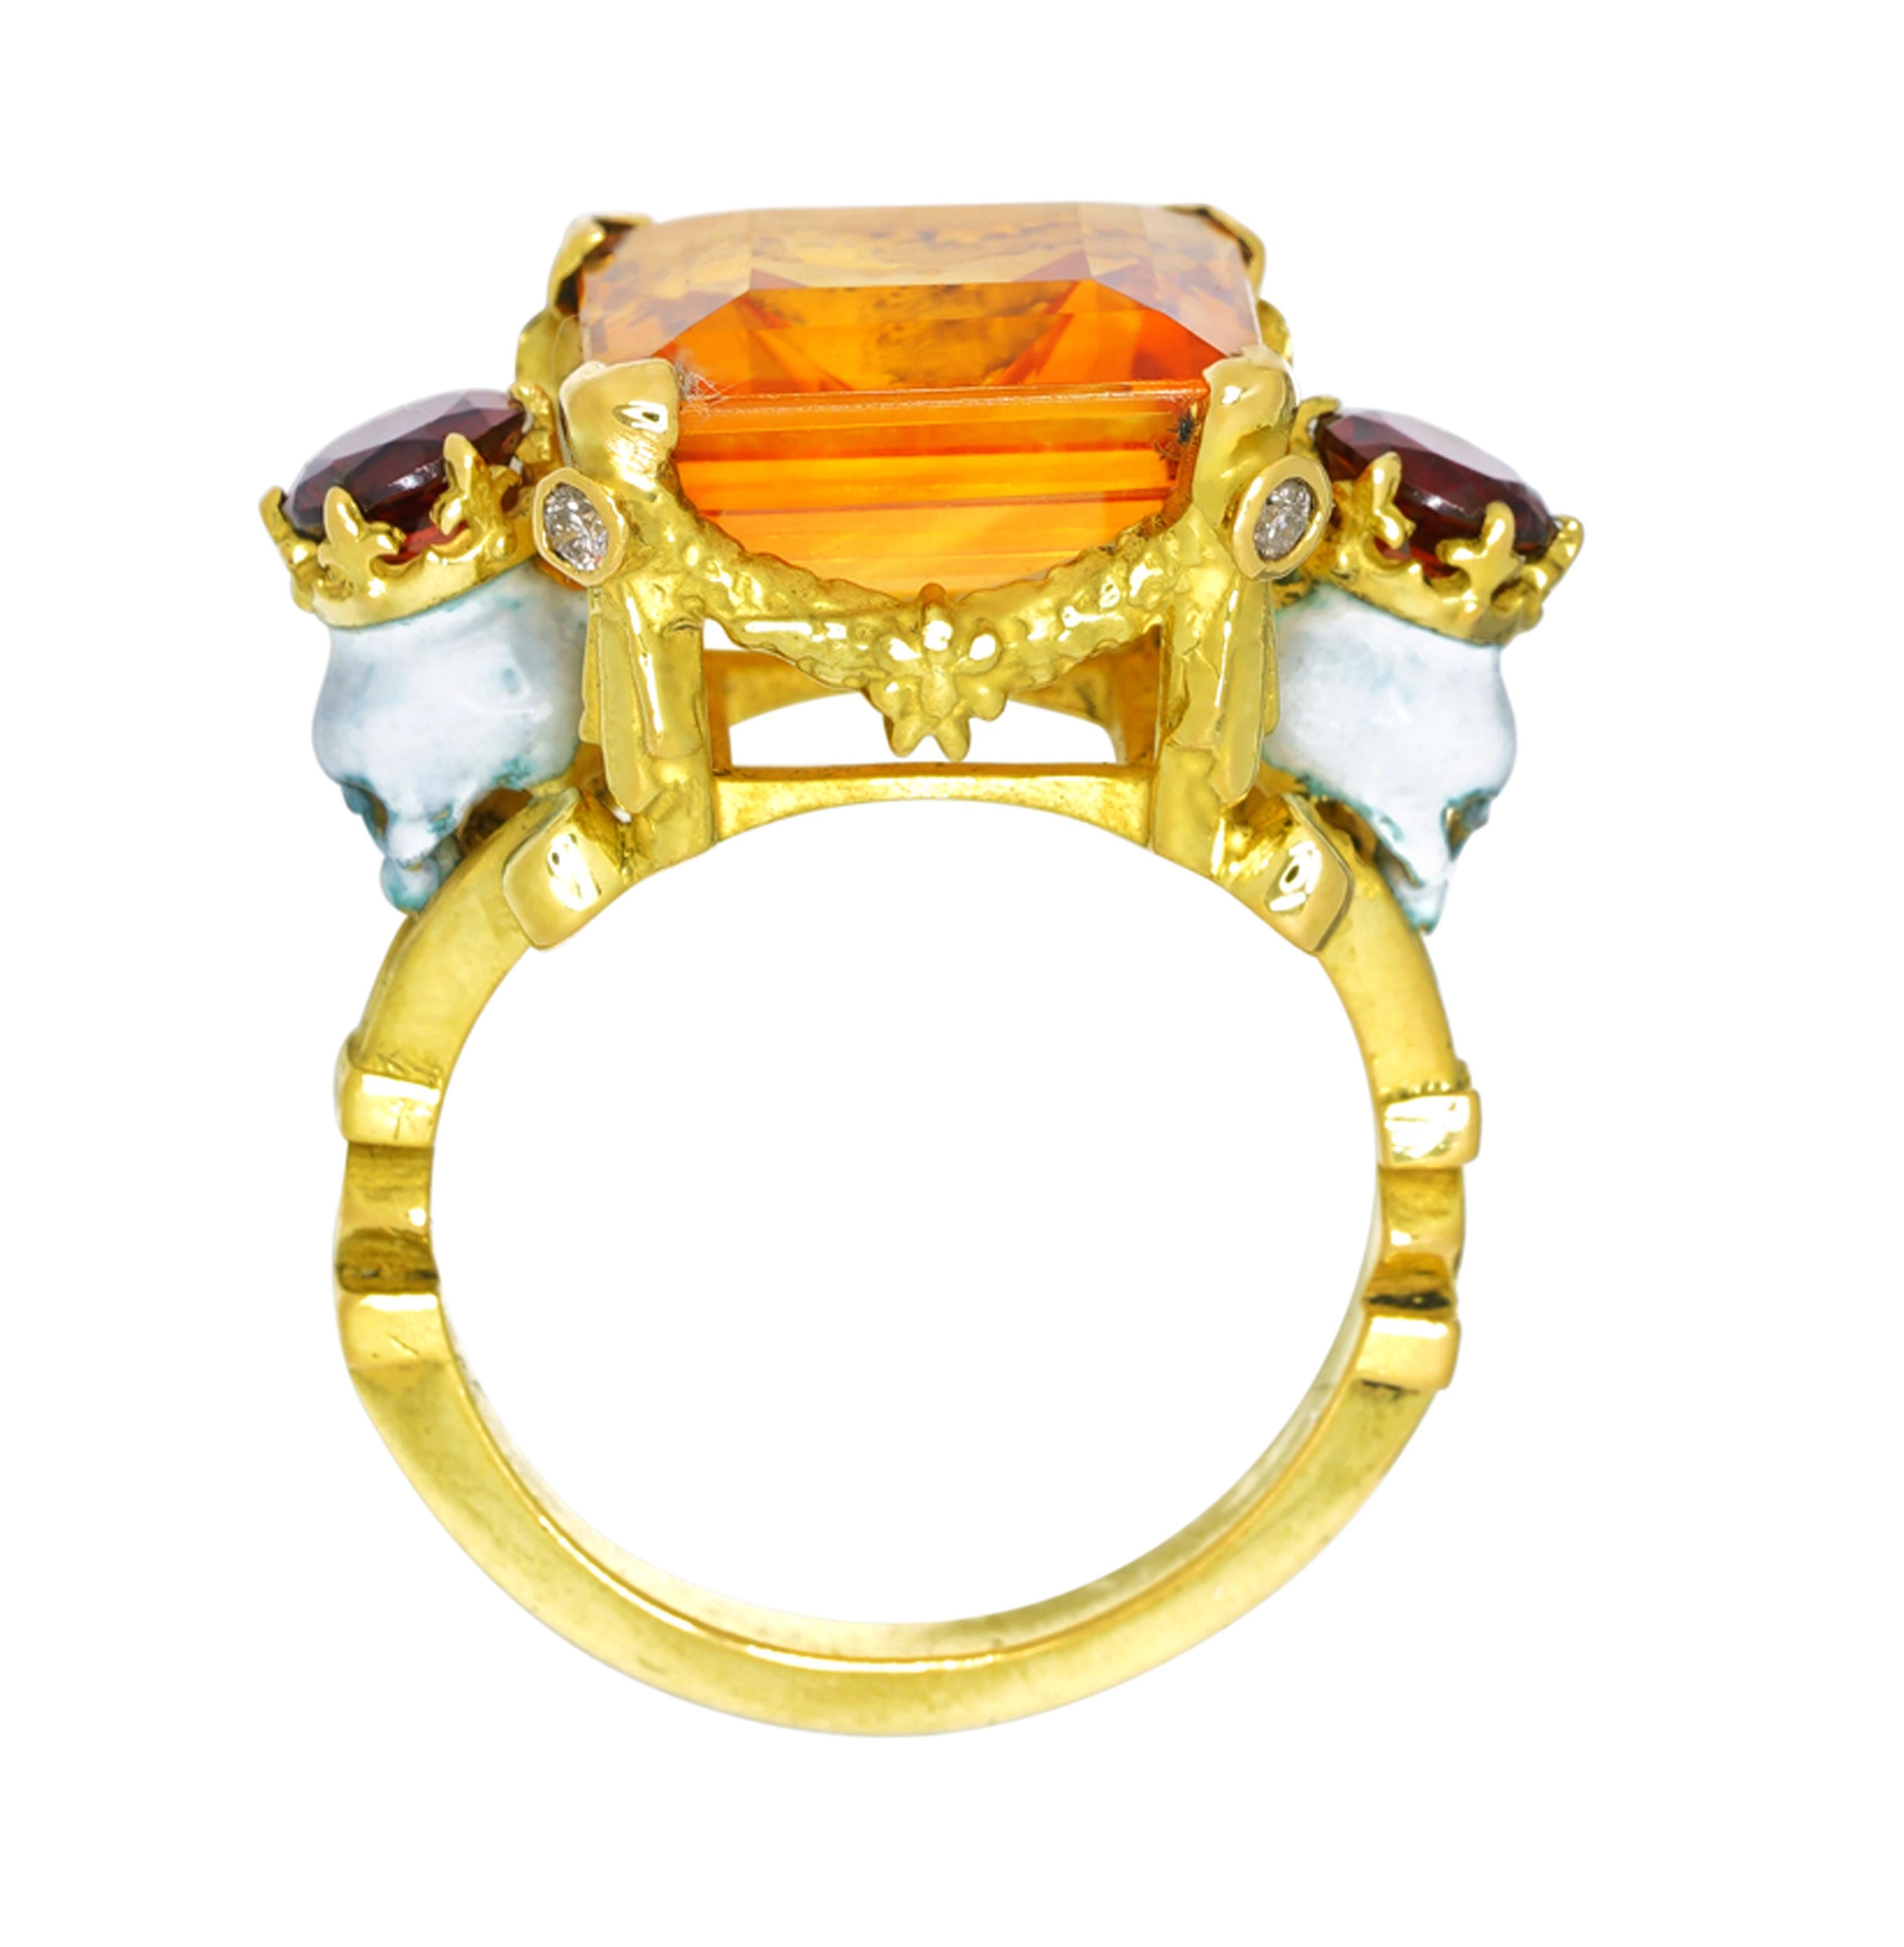 Handcrafted in 18kt yellow gold this empyreal ring features a spectacular central 13.5mm x 13.5mm x 5.5mm citrine aloft a signature William Llewellyn Griffiths garland setting studded with four 1.4mm pink diamonds. The heavenly central stone is